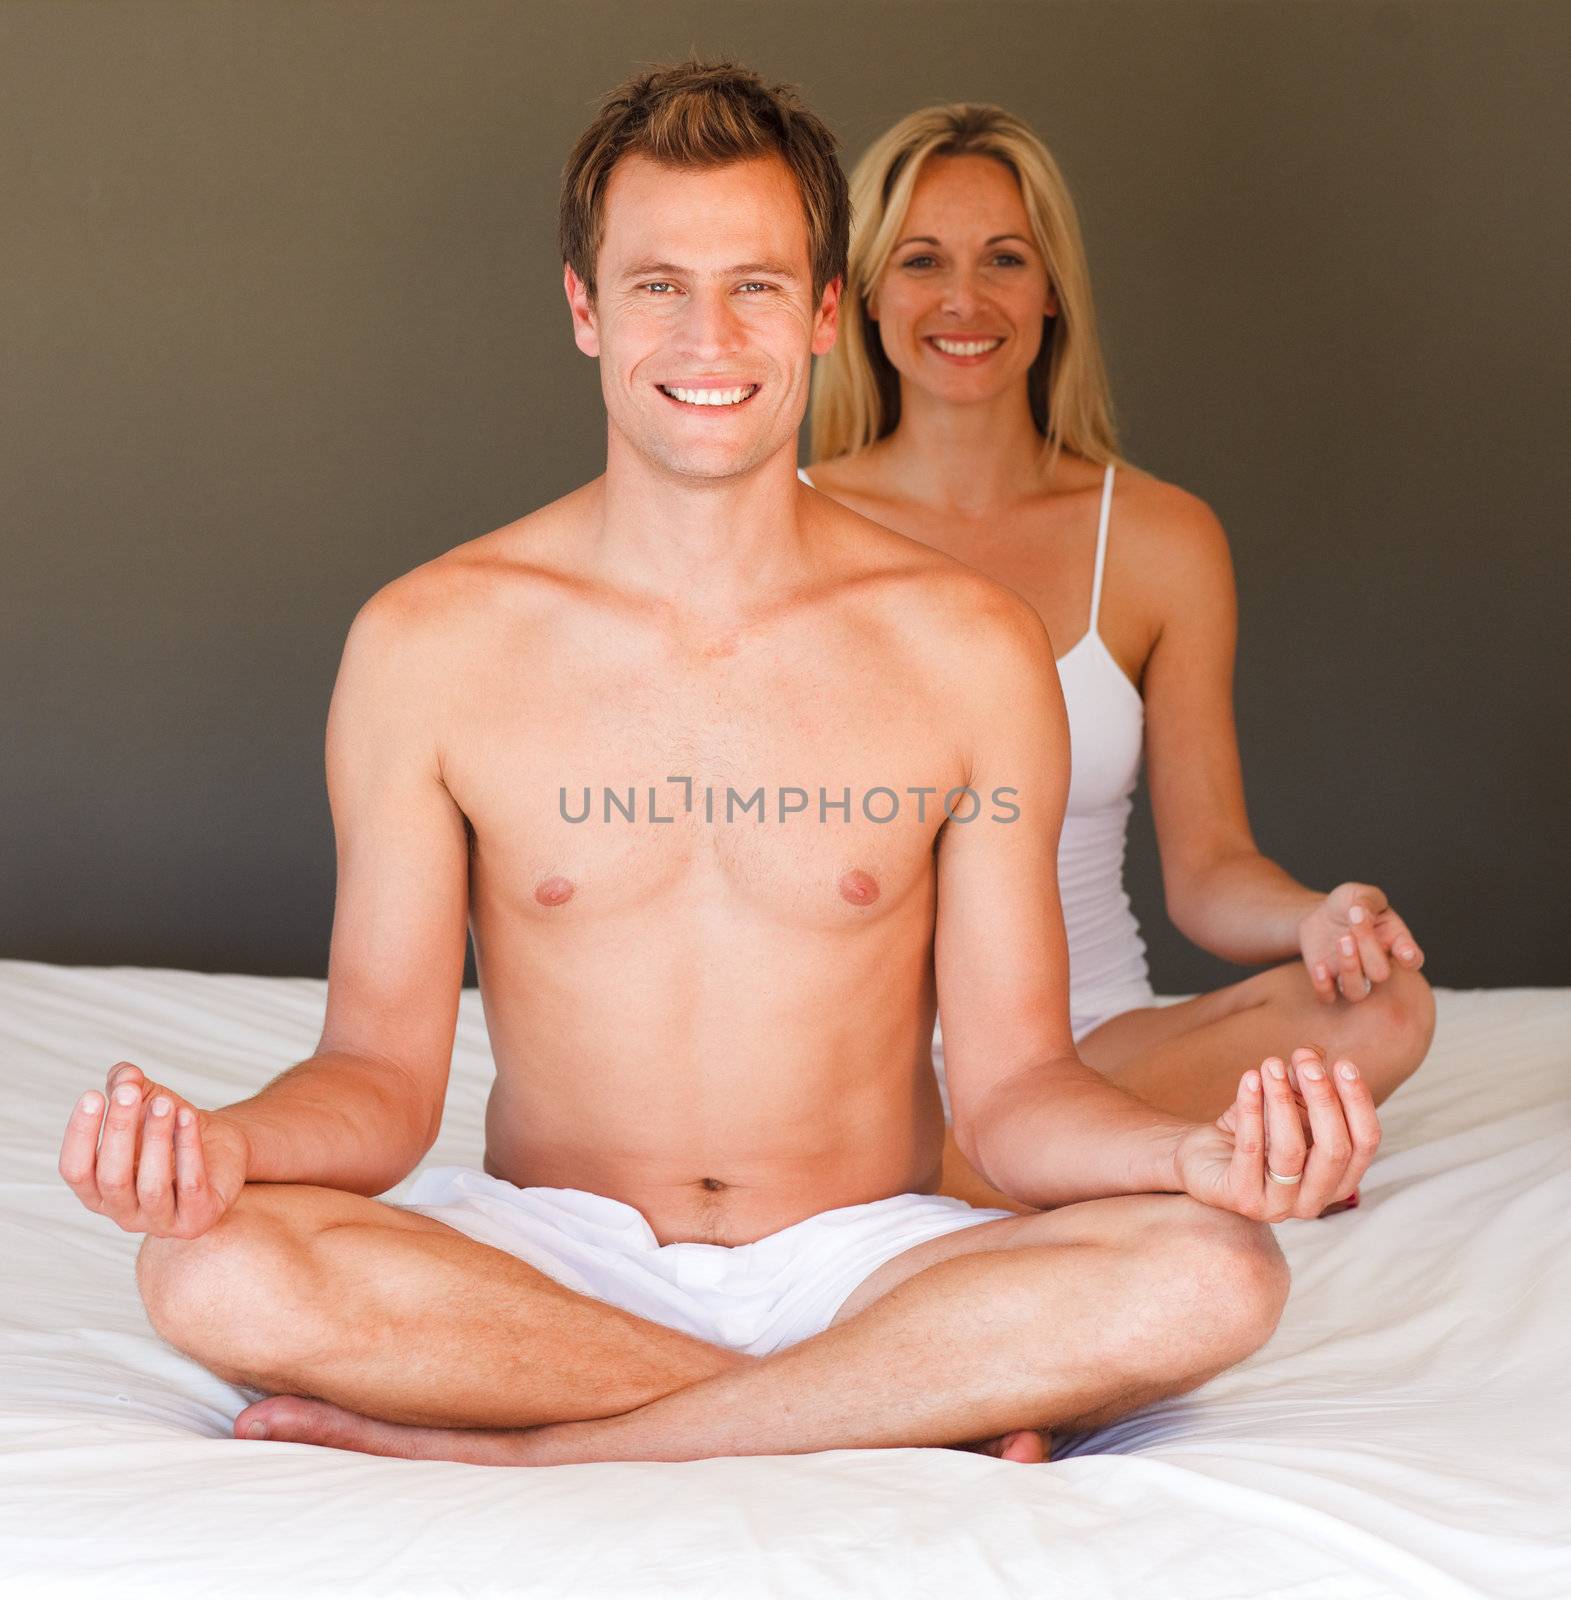 Smiling young couple doing exercises on bed